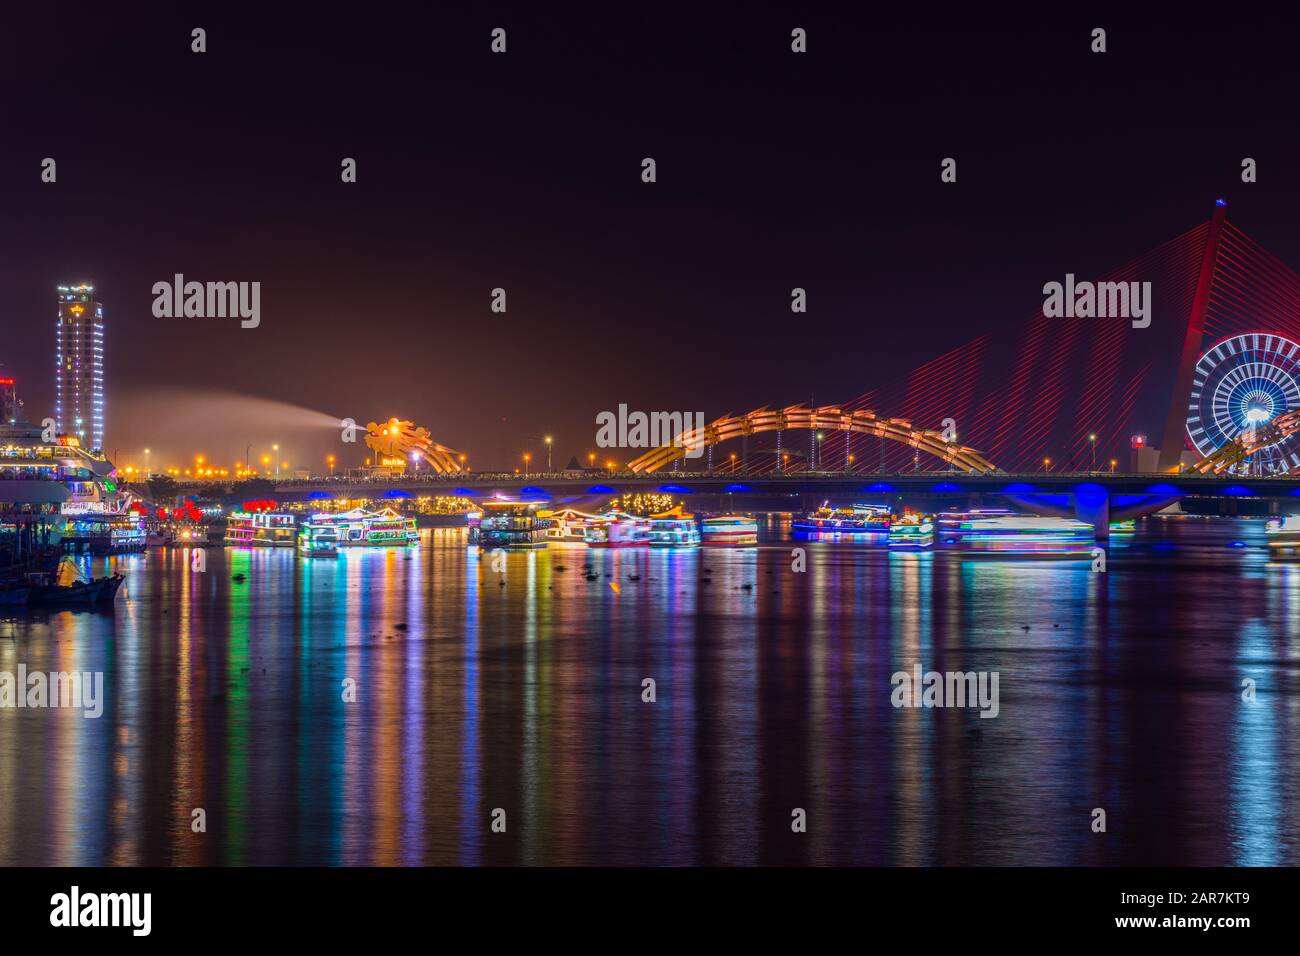 Dragon Bridge at night the icon of the Da Nang City, Vietnam. Dragon breathes out stream of water during weekend showtime. Stock Photo